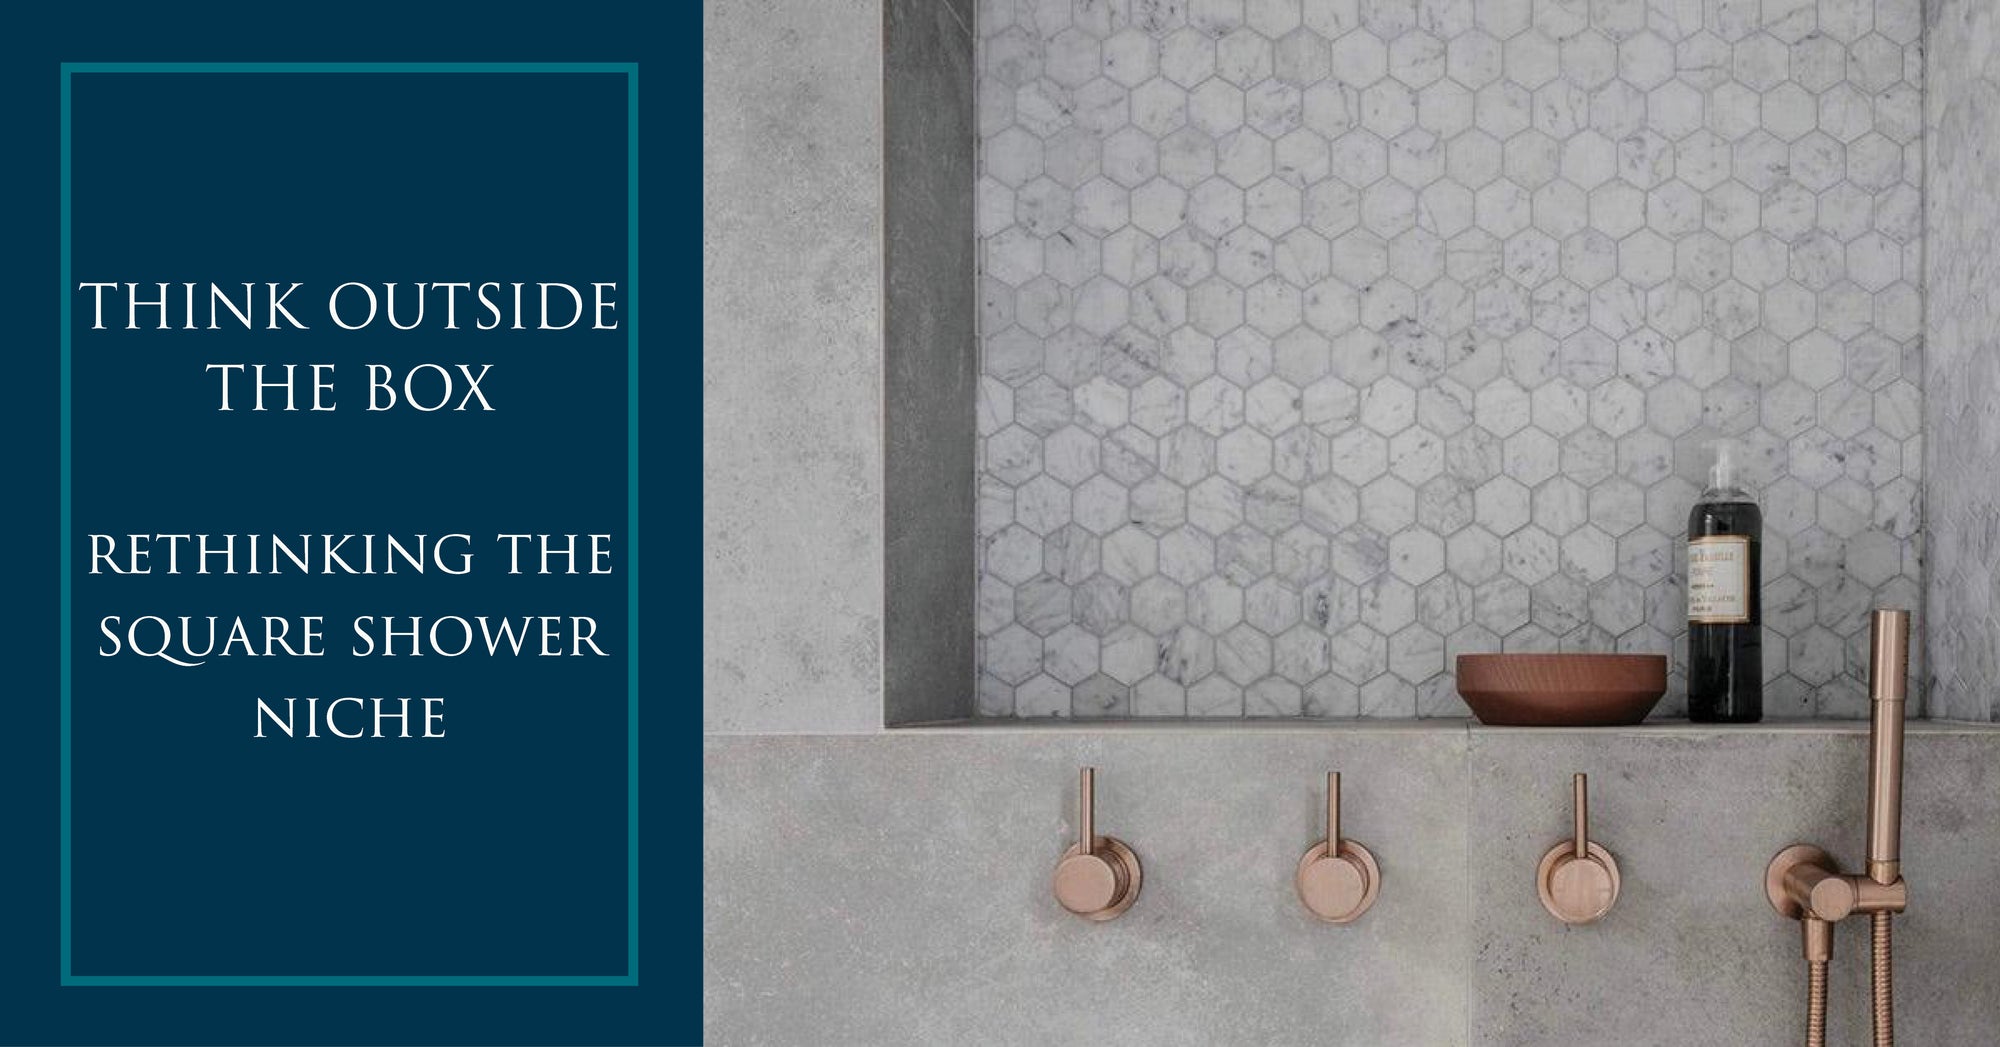 Designing A Shower Niche That's Functional + Pretty